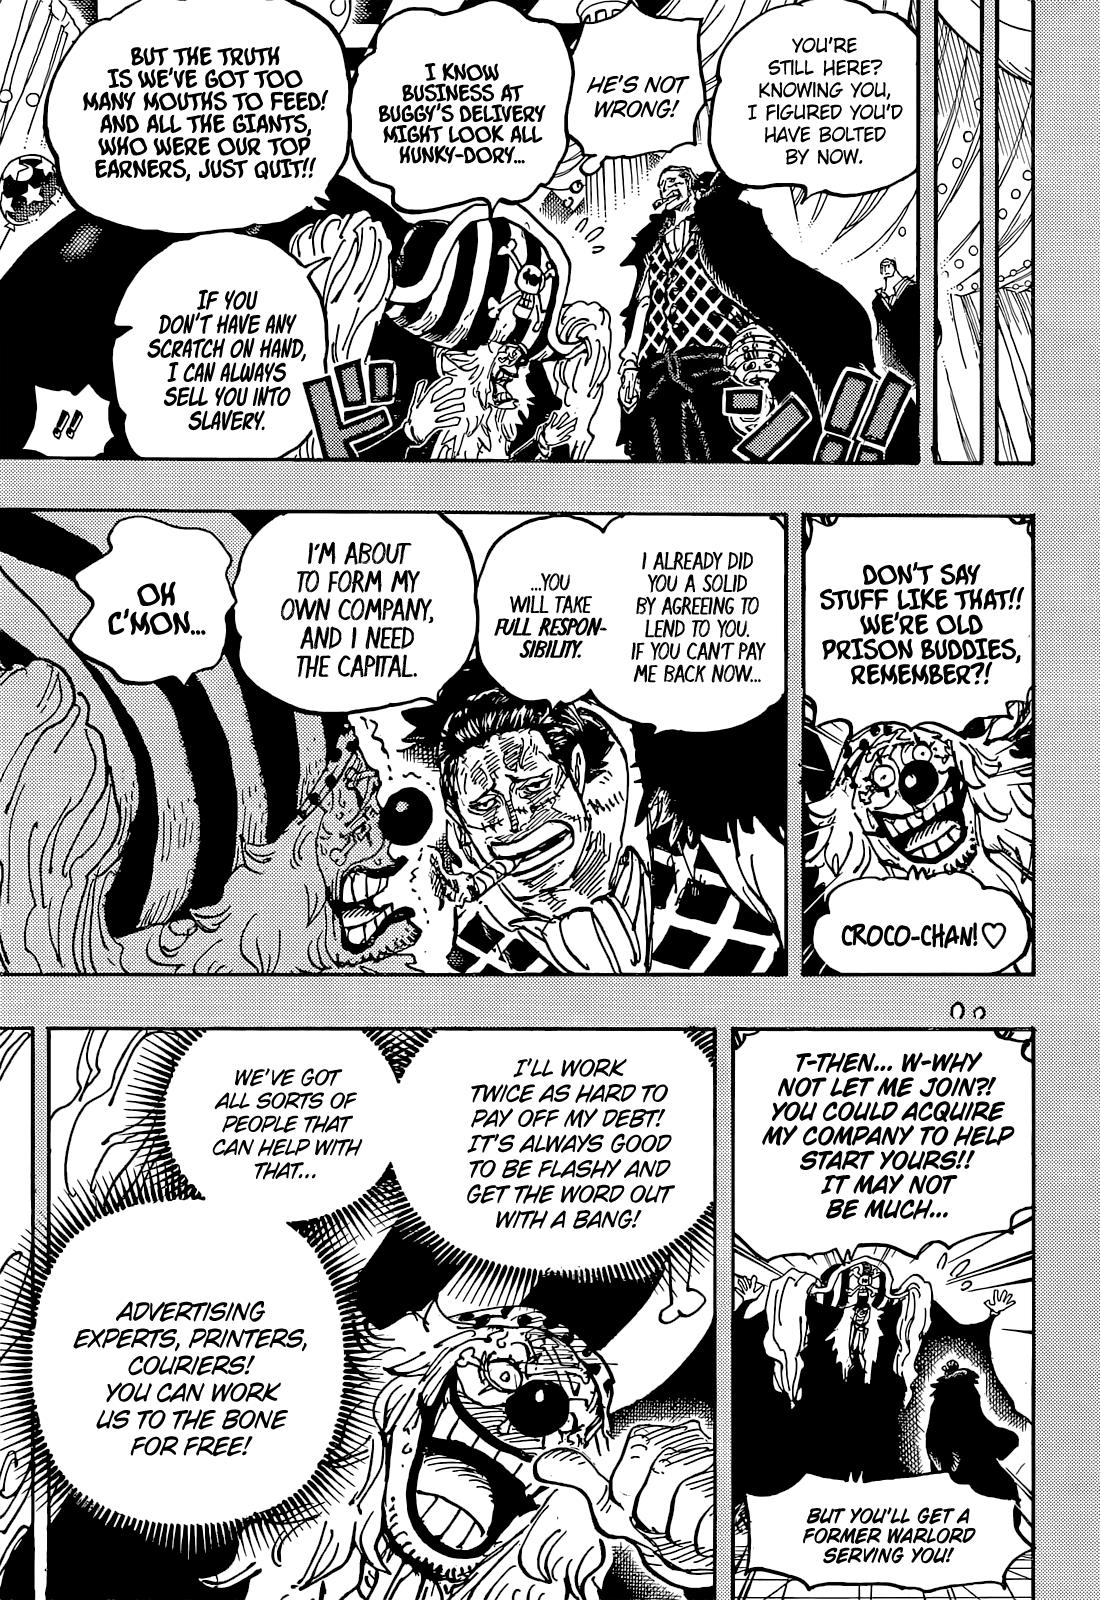 One Piece Chapter 1058 Release date, Time and Spoilers